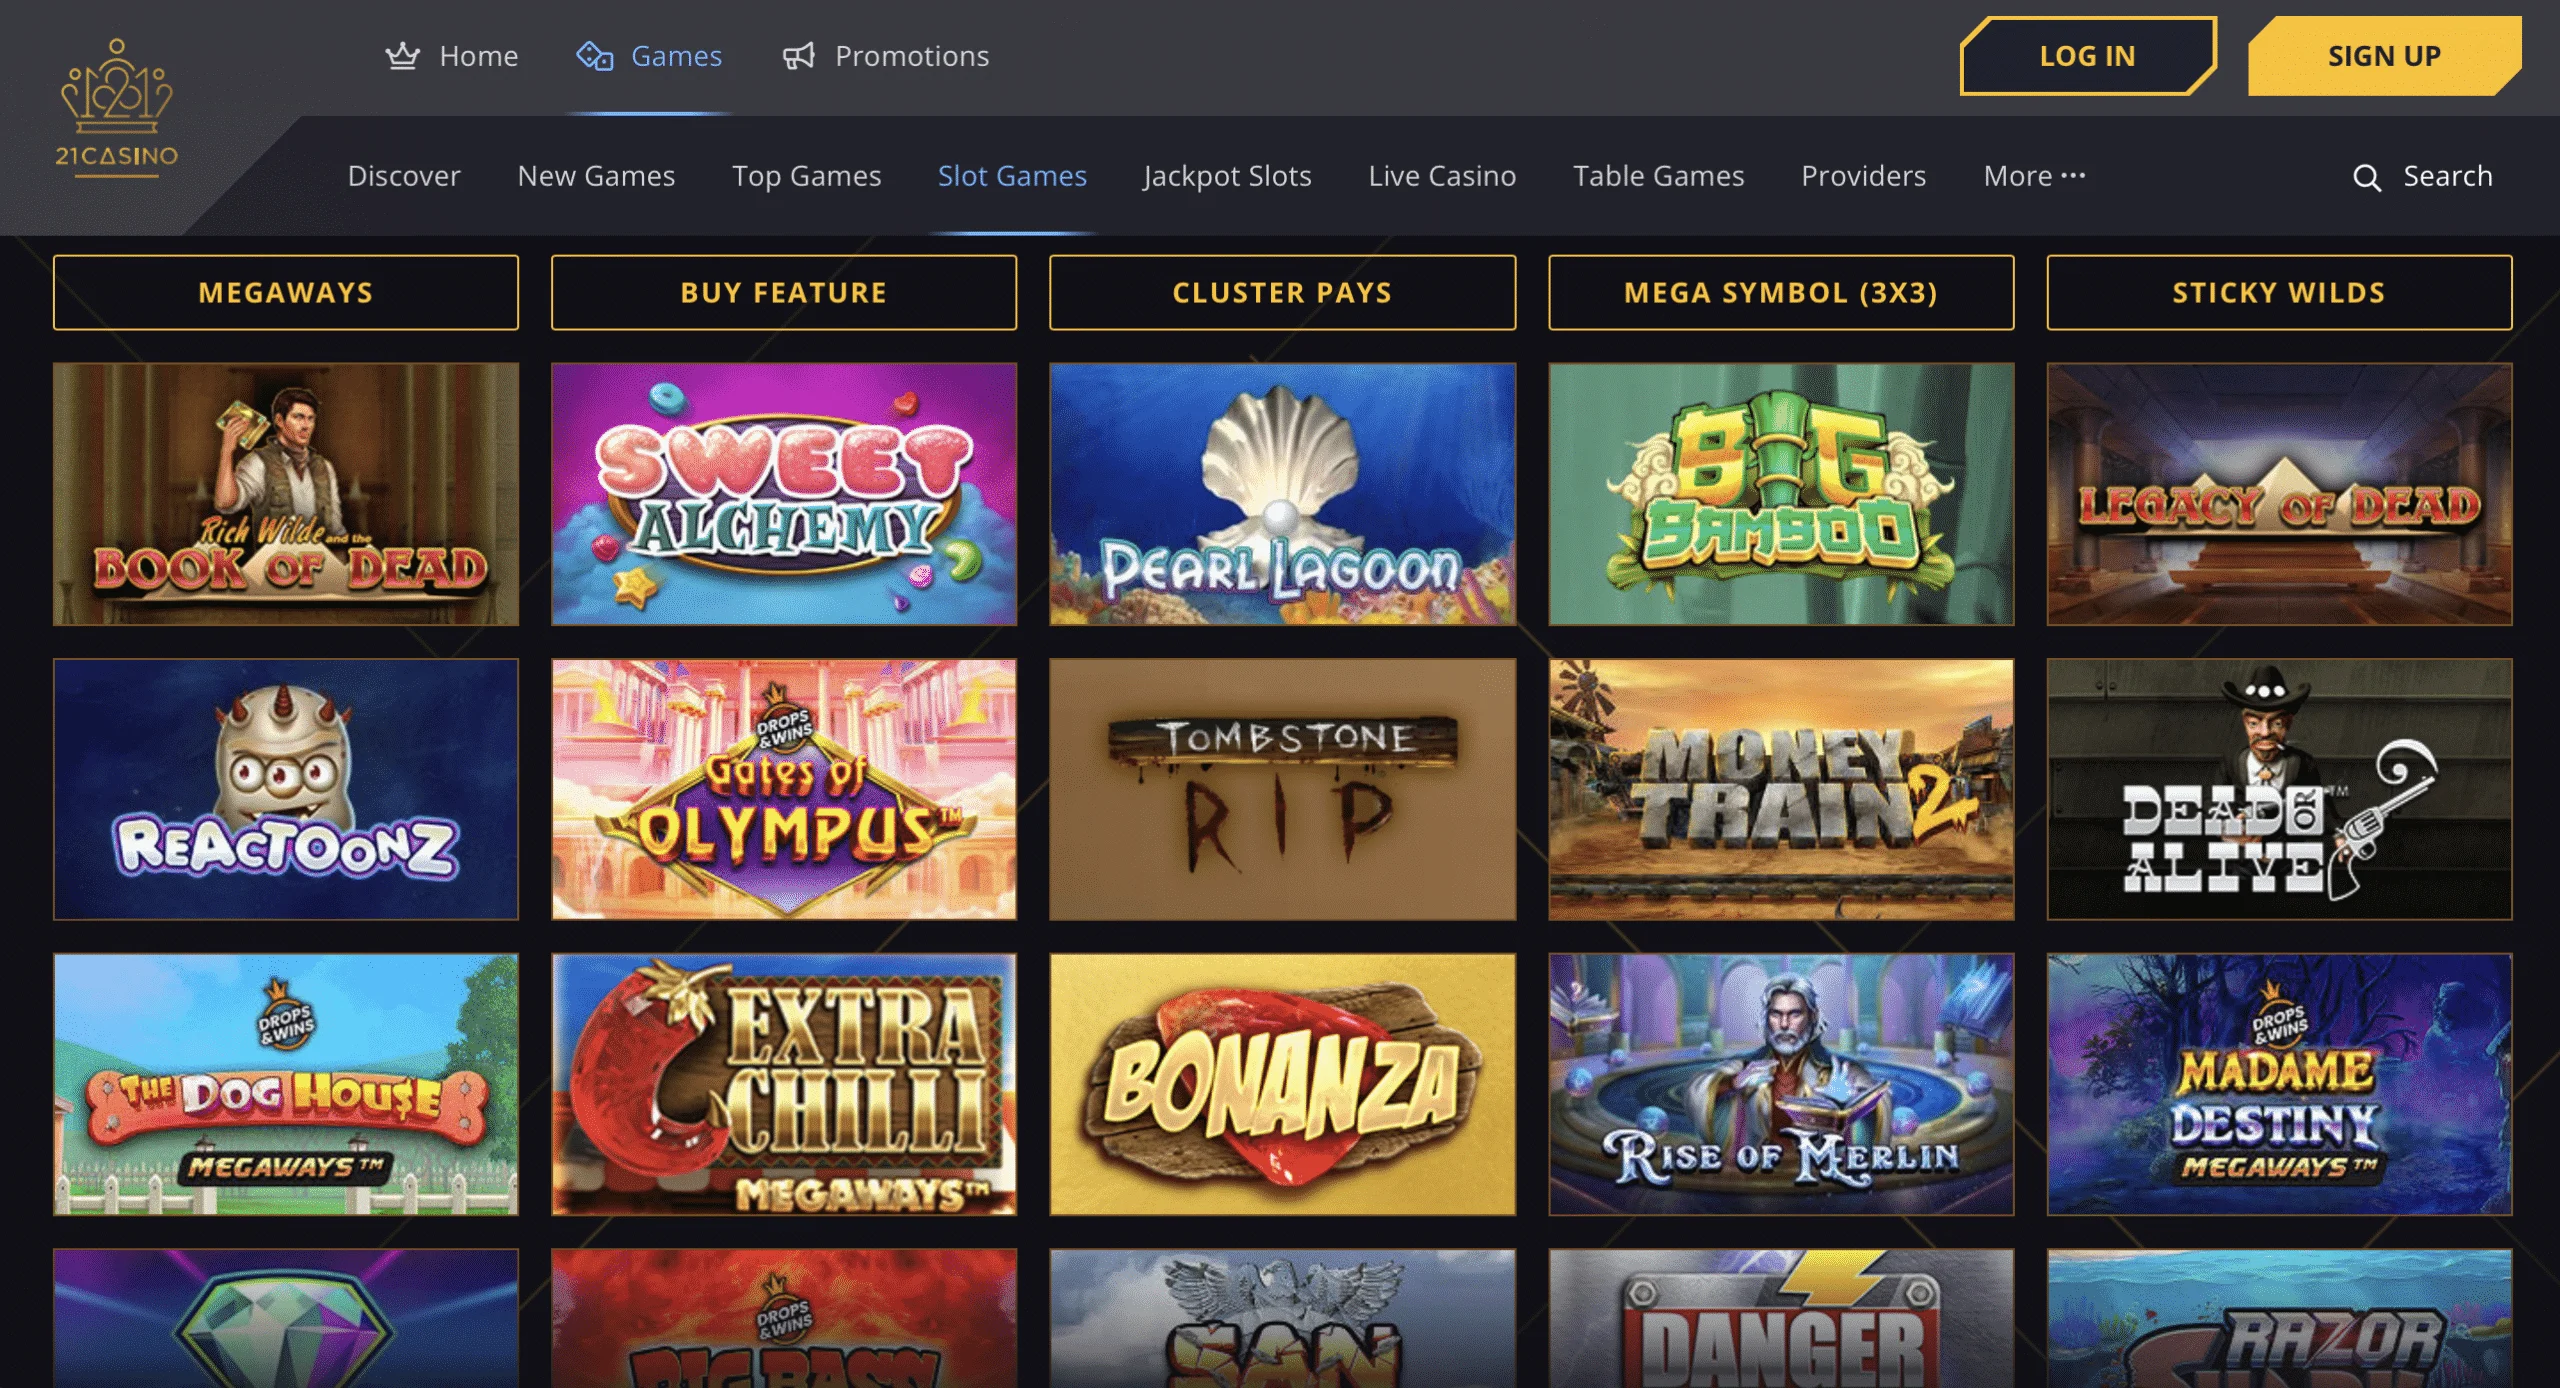 21 Casino Game Selection